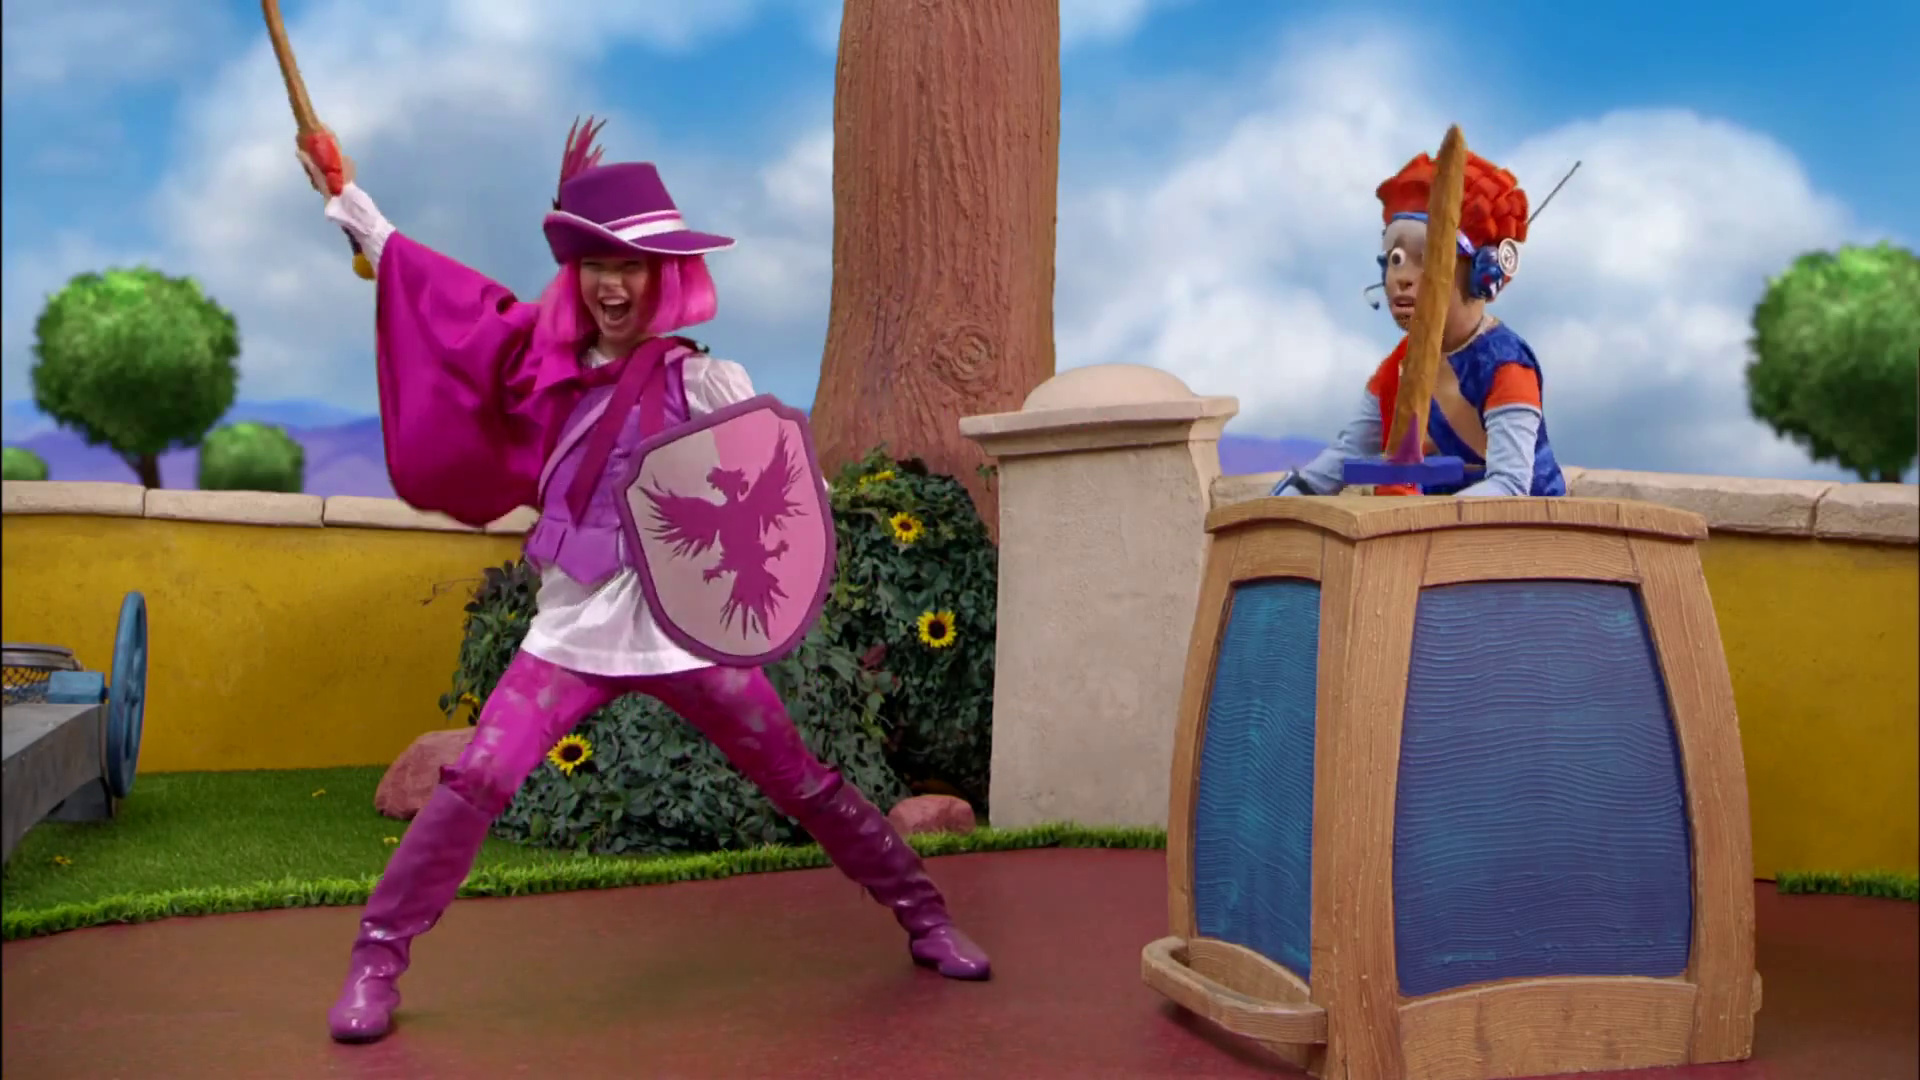 LazyTown TV Series, High-definition wallpaper, Playful and lively, 1920x1080 Full HD Desktop